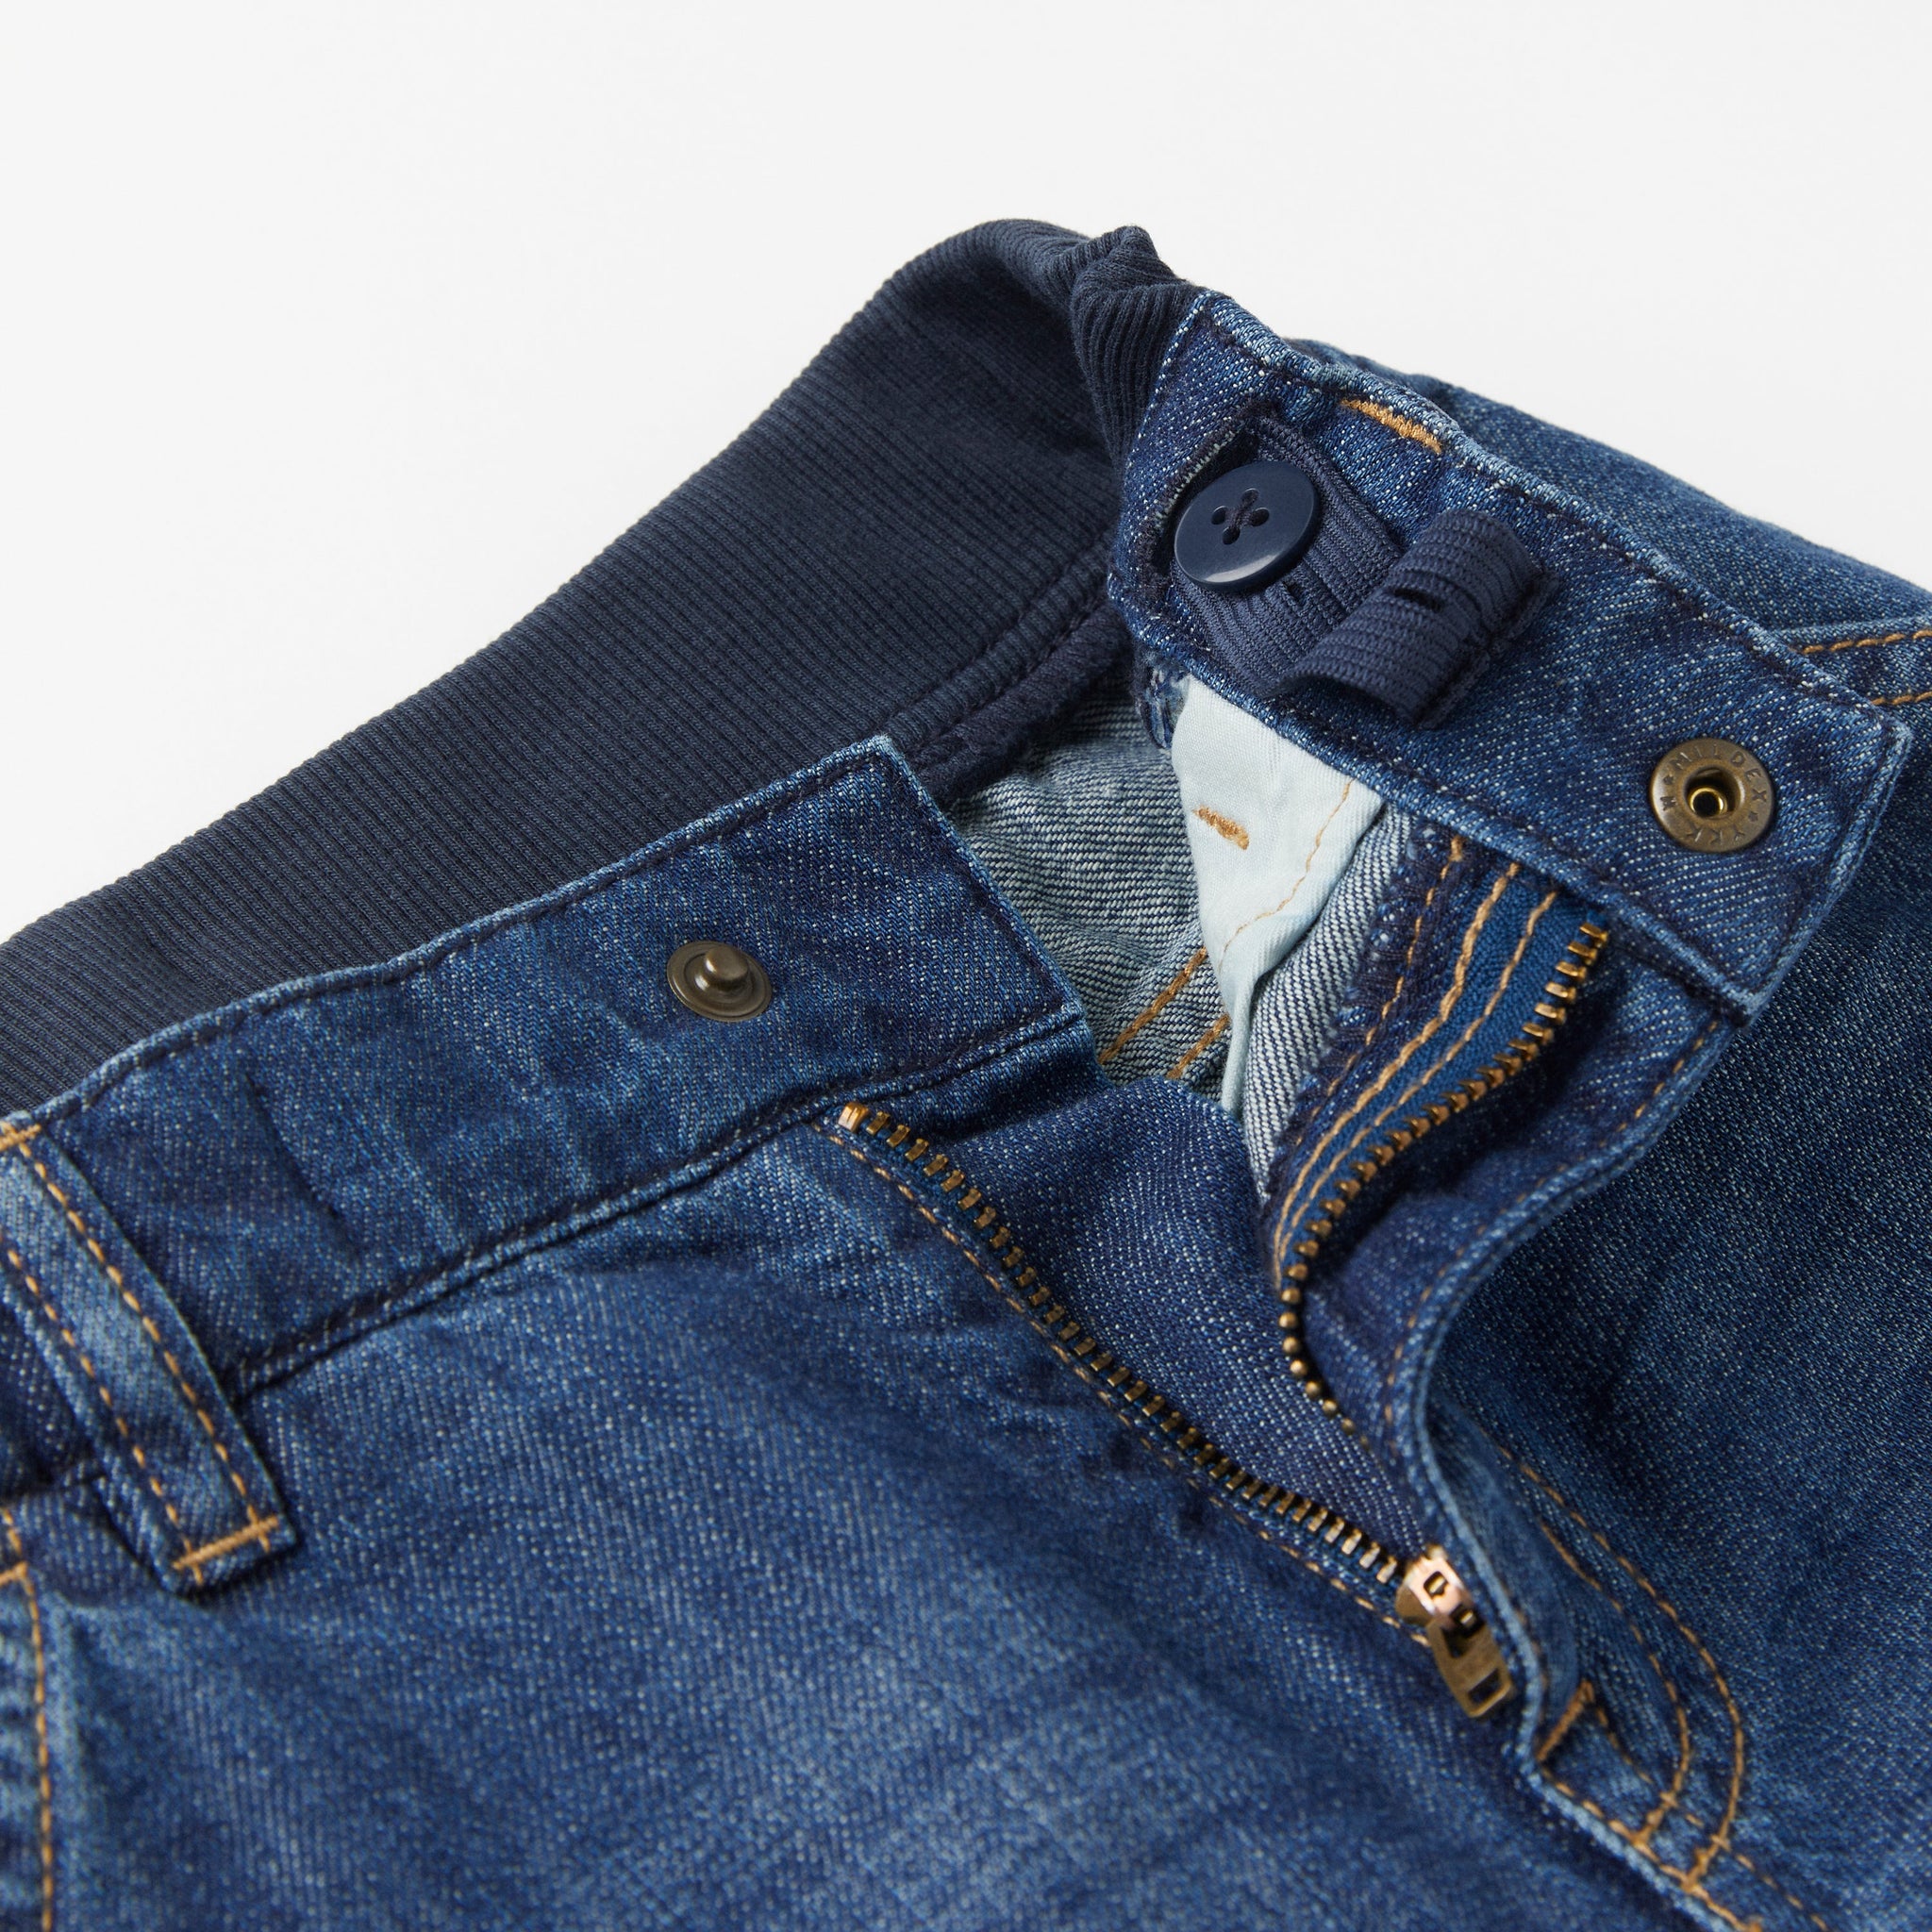 Take a look at our Organic Loose Fit Kids Light Jeans from the new Polarn O. Pyret Kidswear collection. The best ethical kids clothes. Shop at PO.P Today